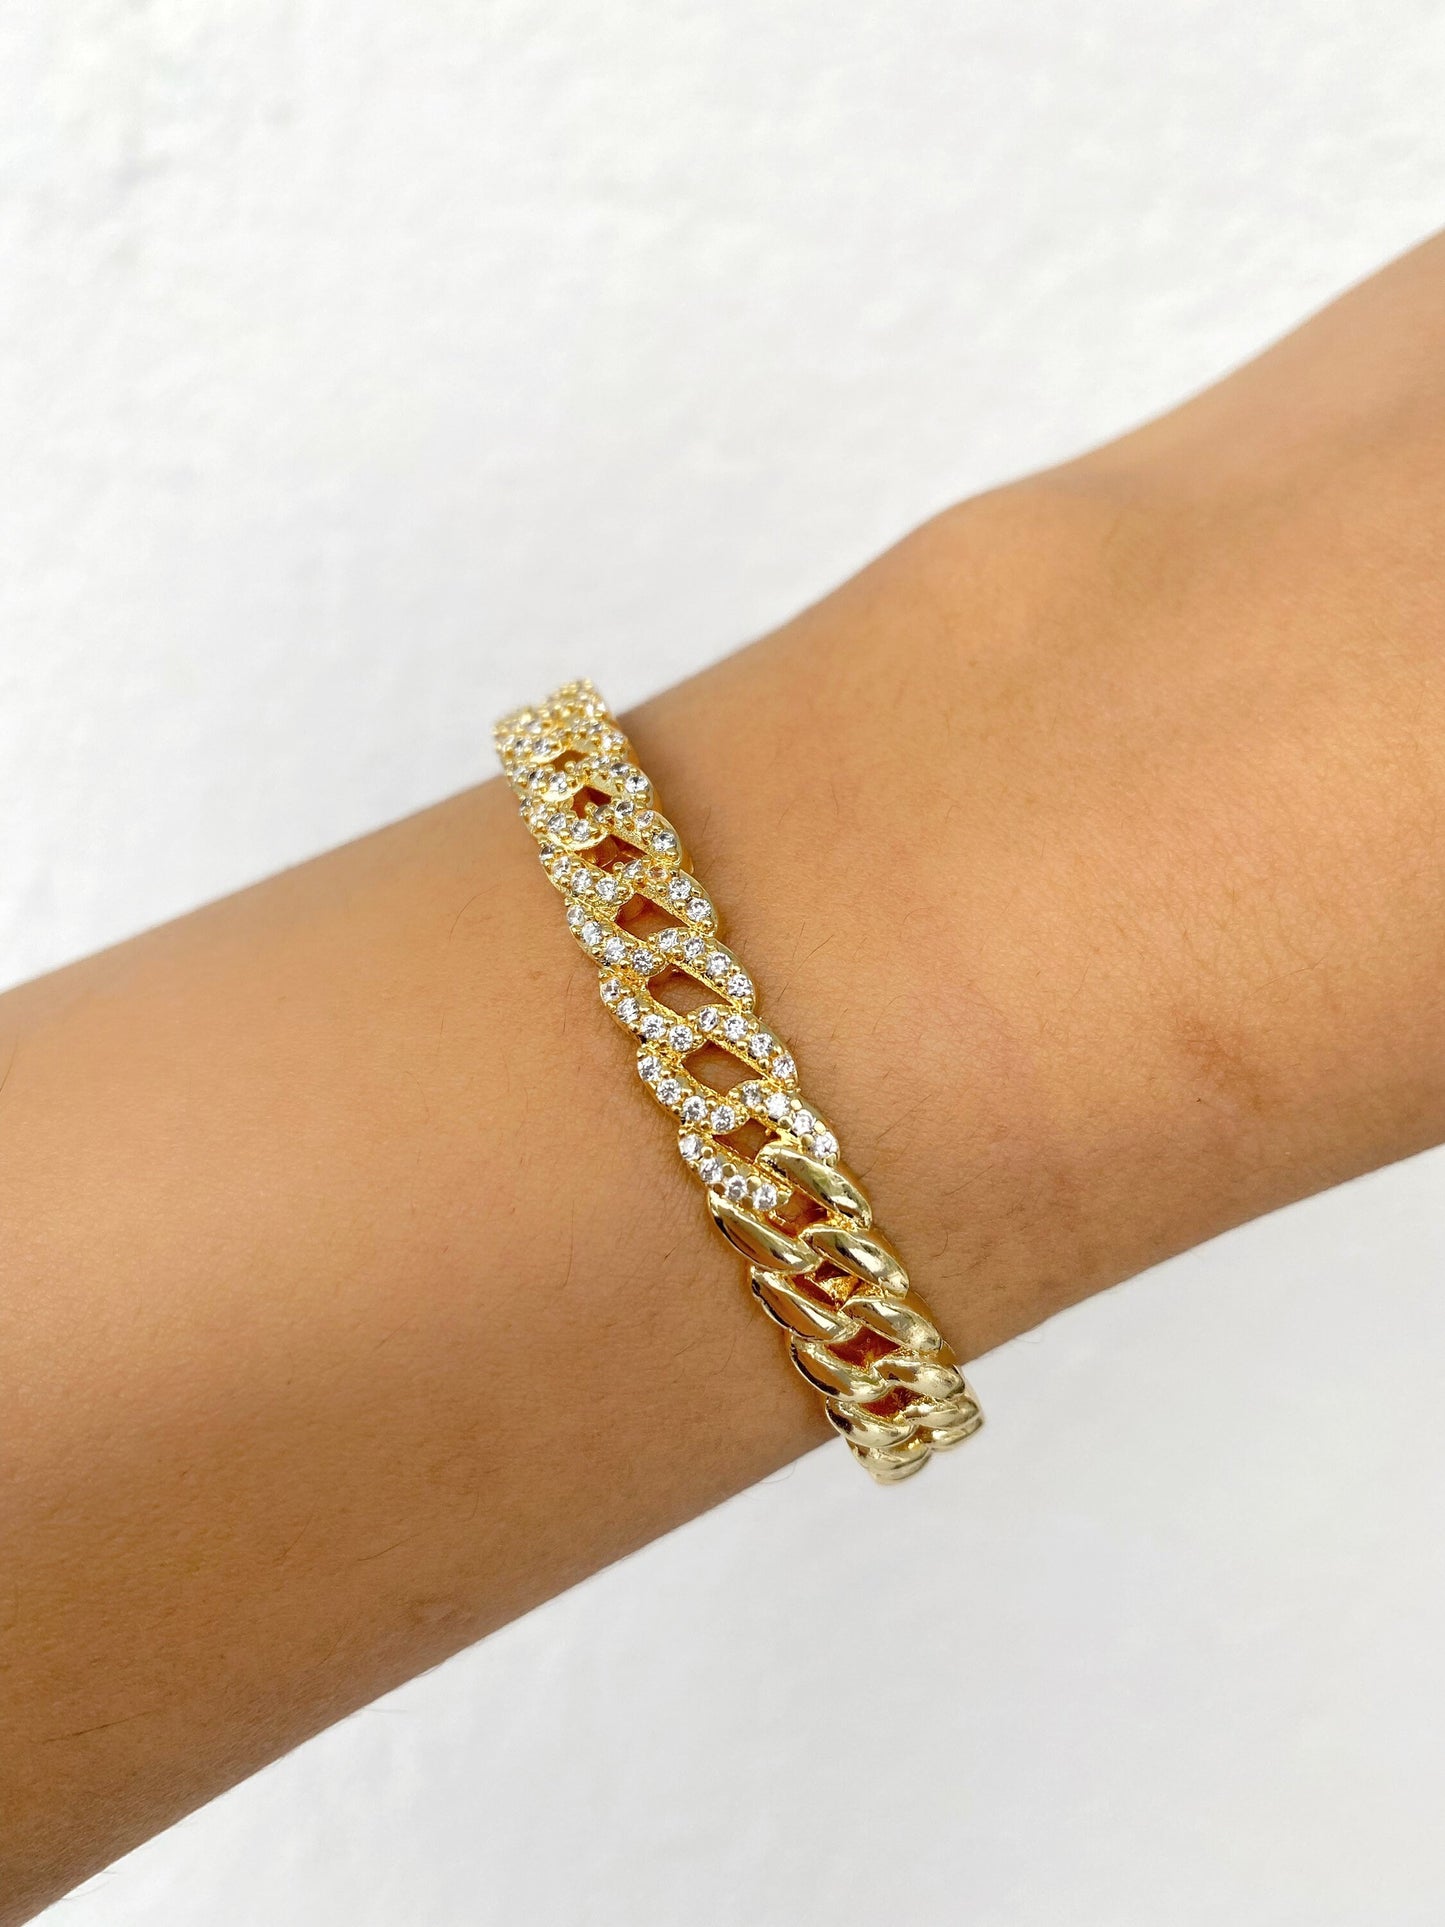 Gold Twisted Rope Cuff Bracelet • Gourmet  Vintage Twisted Bangle